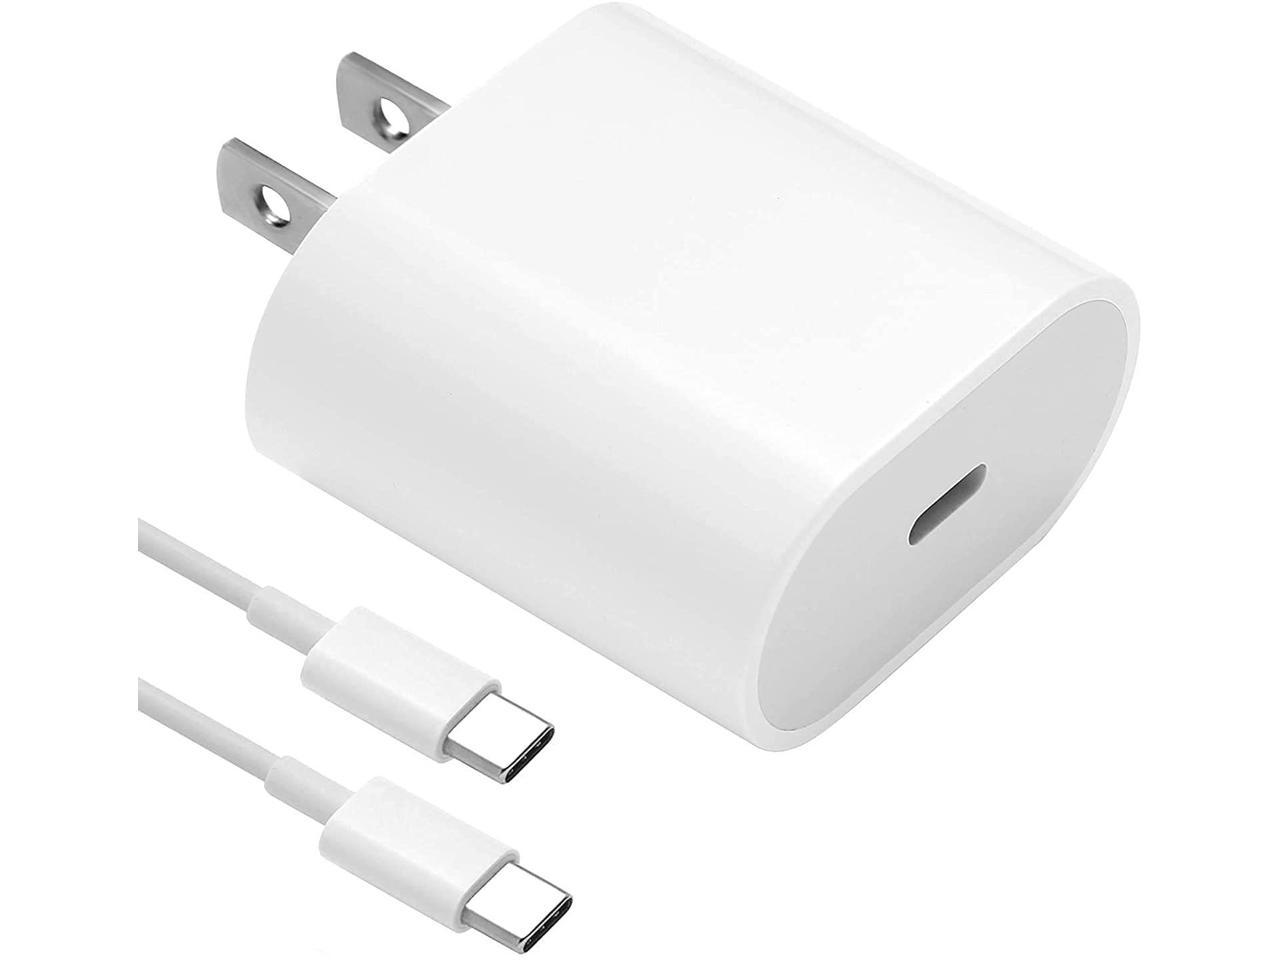 6th generation Wall AC Home Charger+3ft USB Cord for Apple iPad 9.7 2018 